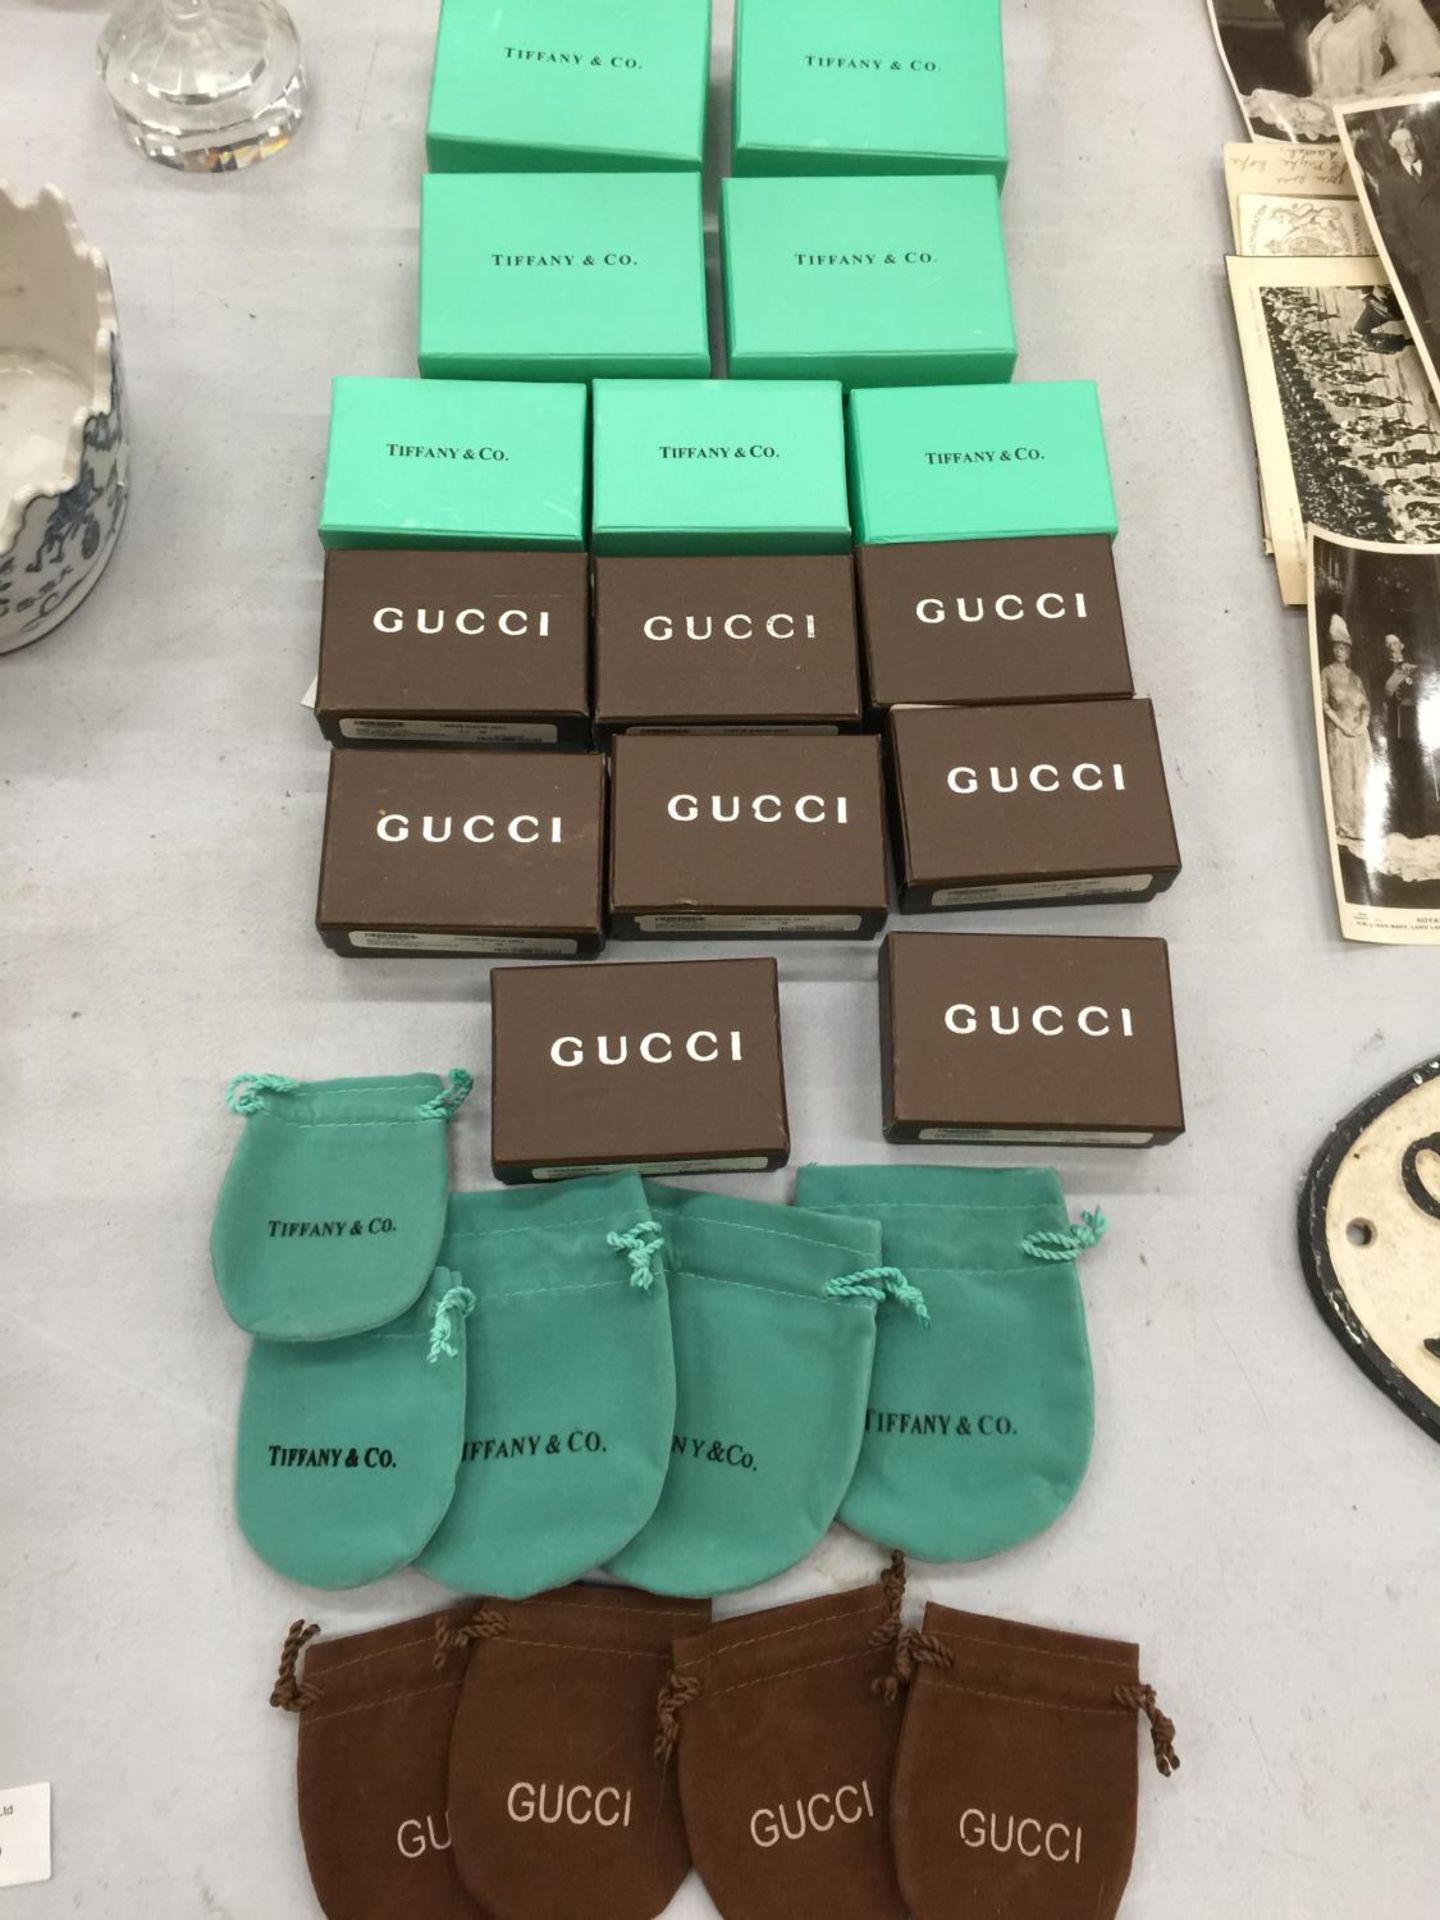 A QUANTITY OF EMPTY JEWELLERY BOXES AND POUCHES MARKED TIFFANY AND GUCCI